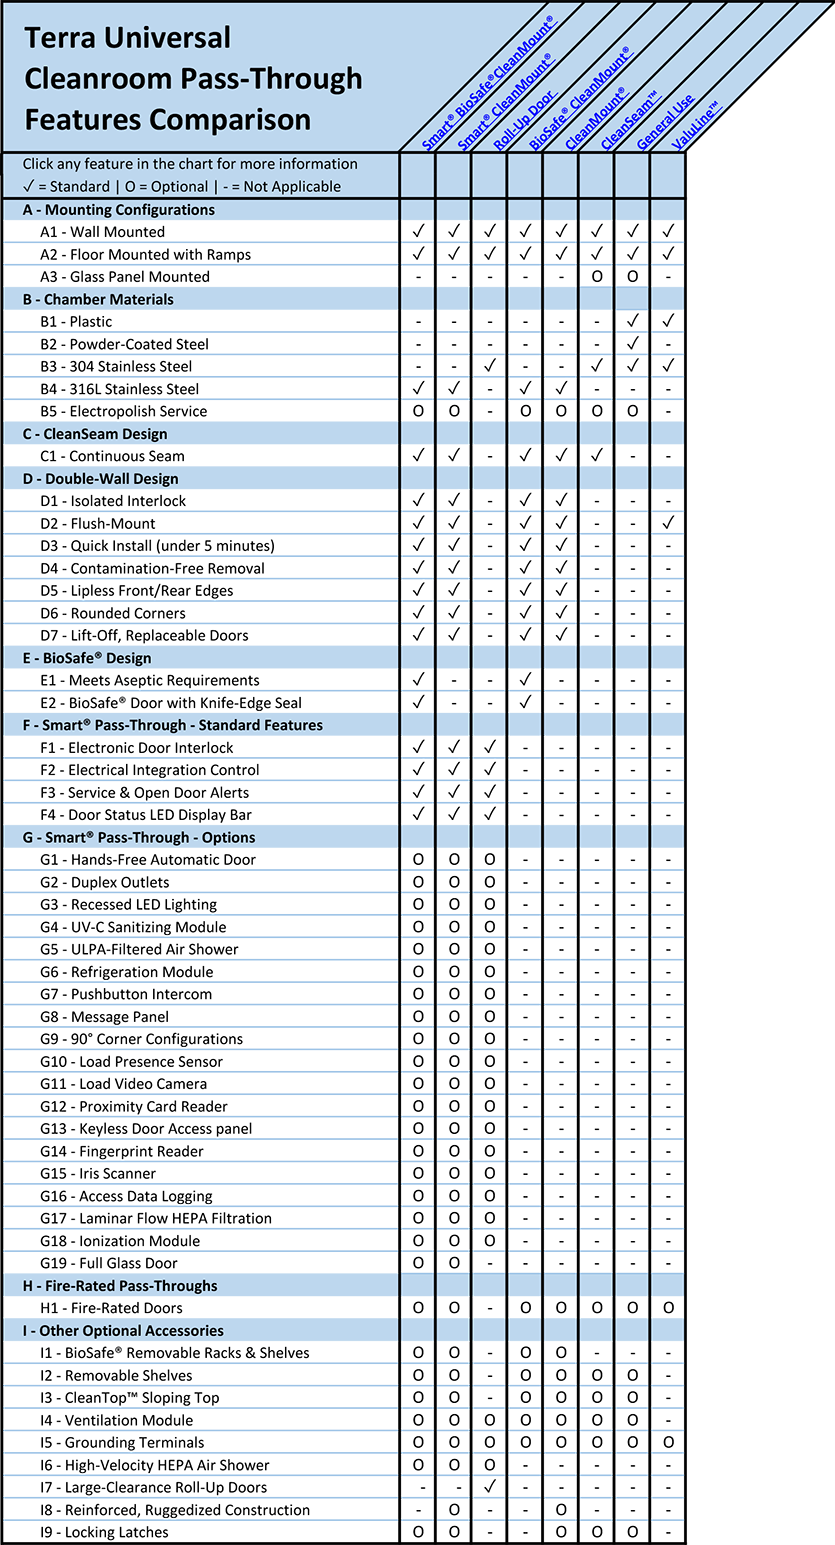 Cleanroon Passthrough Features Comparison Chart